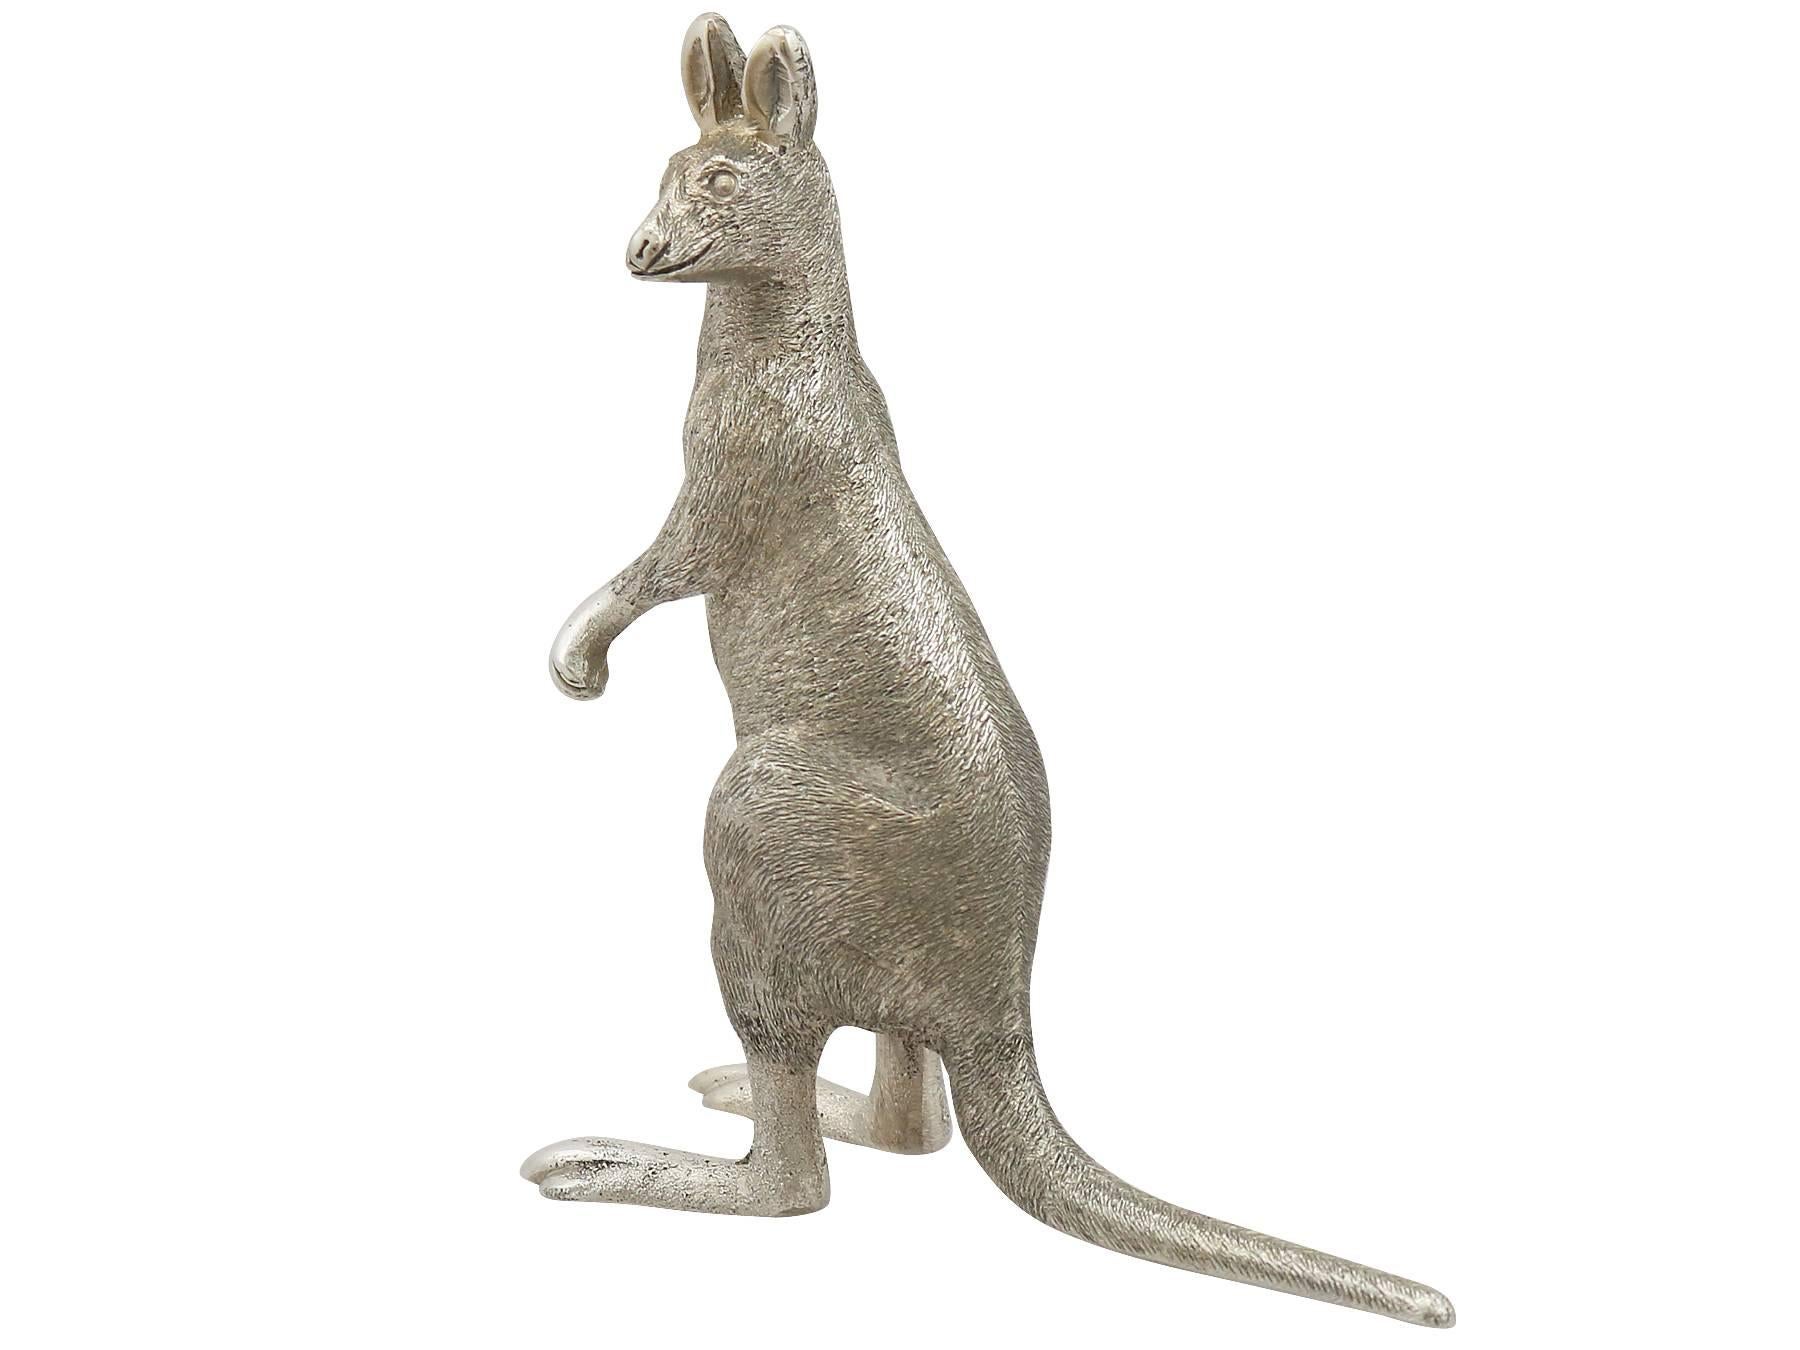 An exceptional, fine and impressive antique sterling silver cast model of a Kangaroo; part of our ornamental silverware collection

This exceptional antique sterling silver cast ornament has been realistically modelled in the form of a